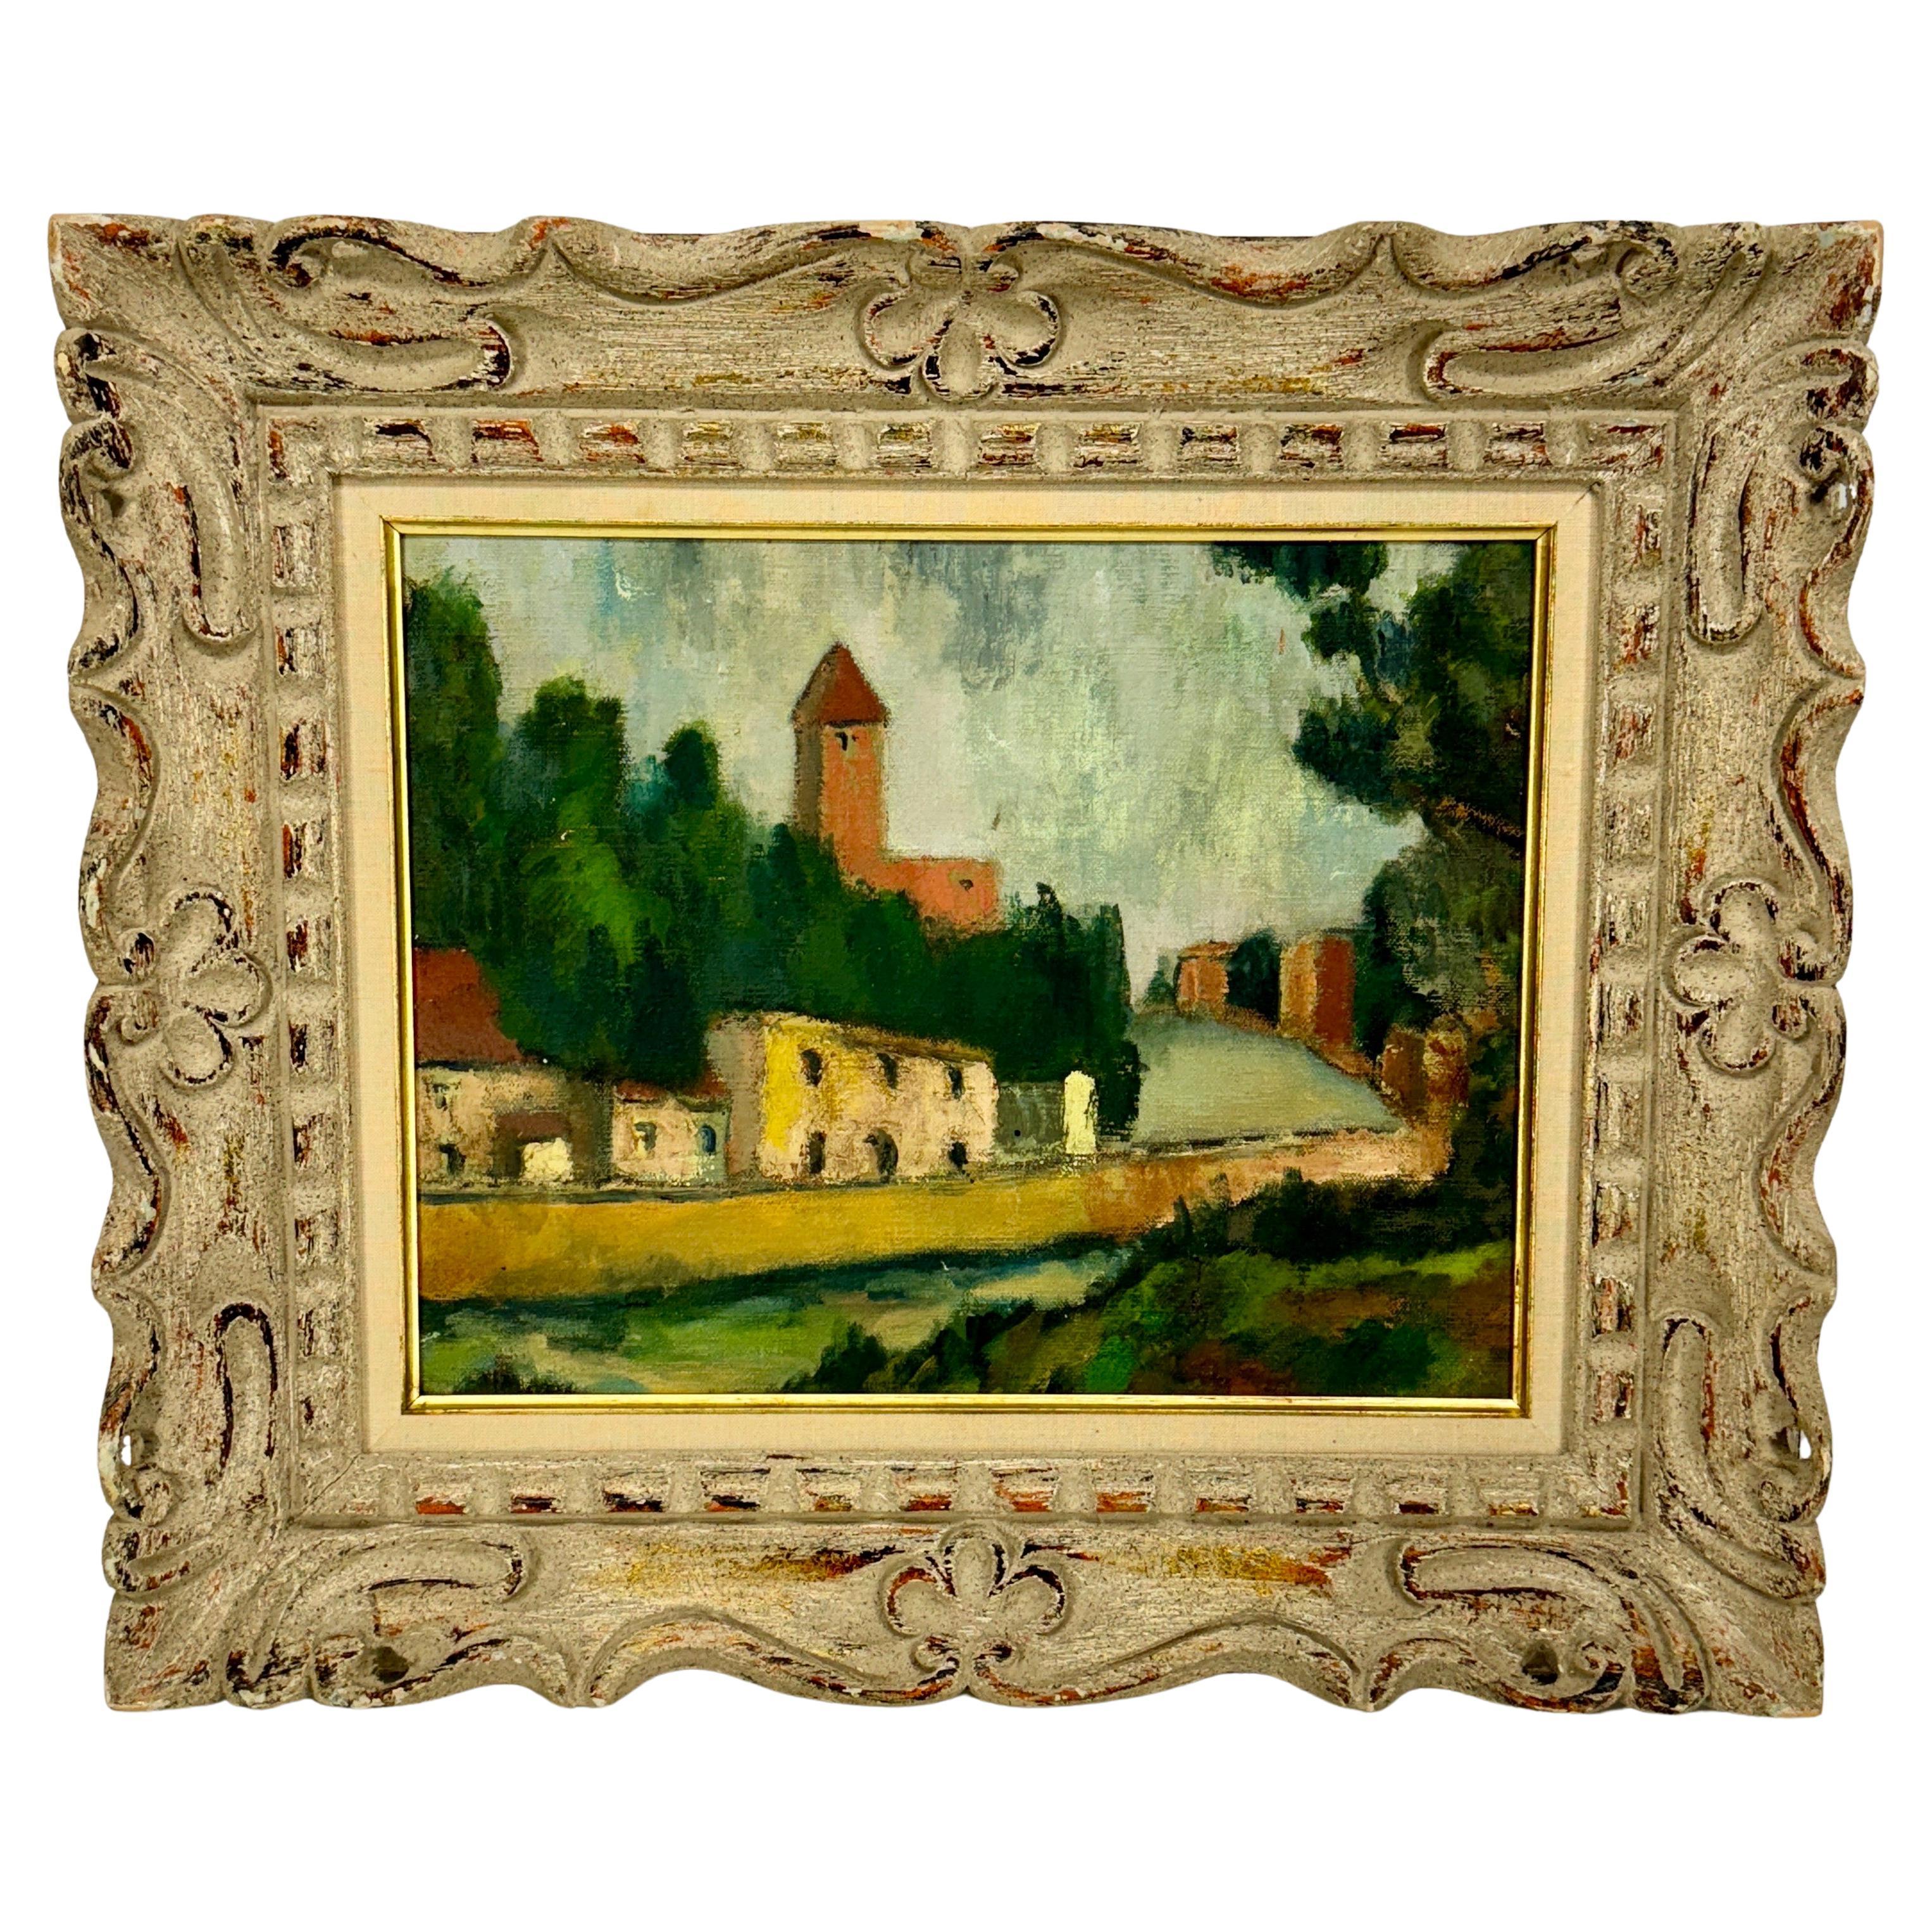 Framed Village Landscape with Houses, 1920's France

A beautiful Parisian painting on canvas depicting a peaceful village landscape with a row of houses on a street featuring a scene along the Seine River. The painting is contained in a carved wood